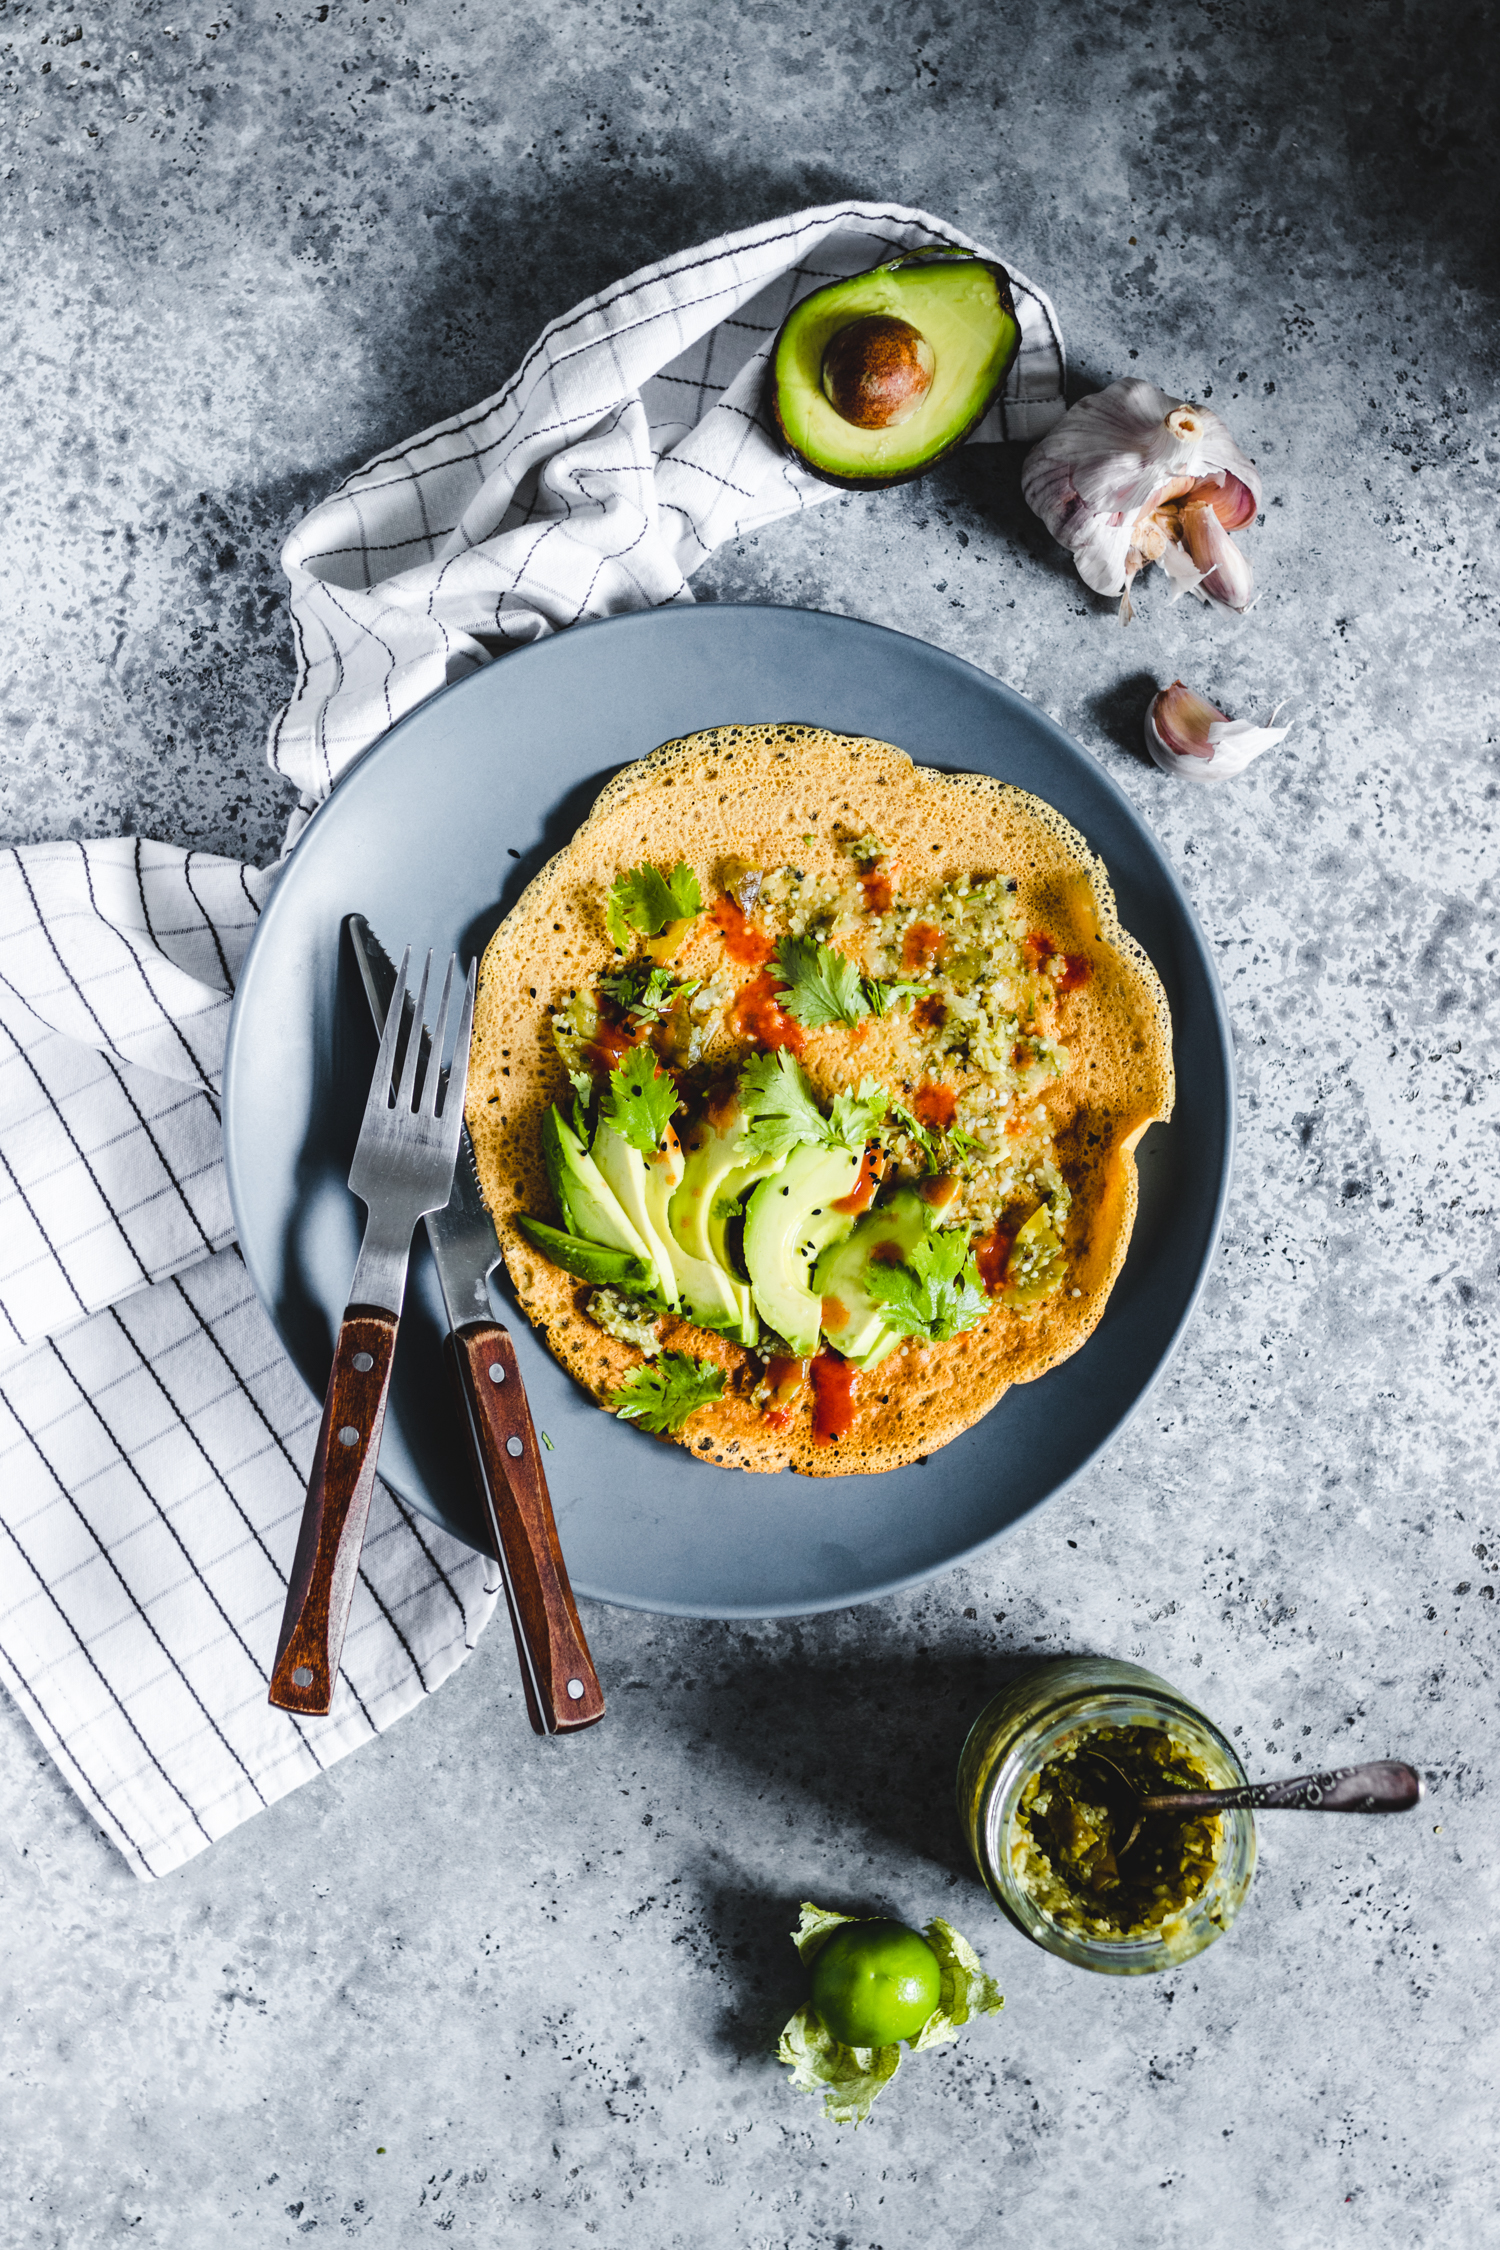 Savoury Flour Chickpea Crepes served with herbs, avocado, and hot sauce